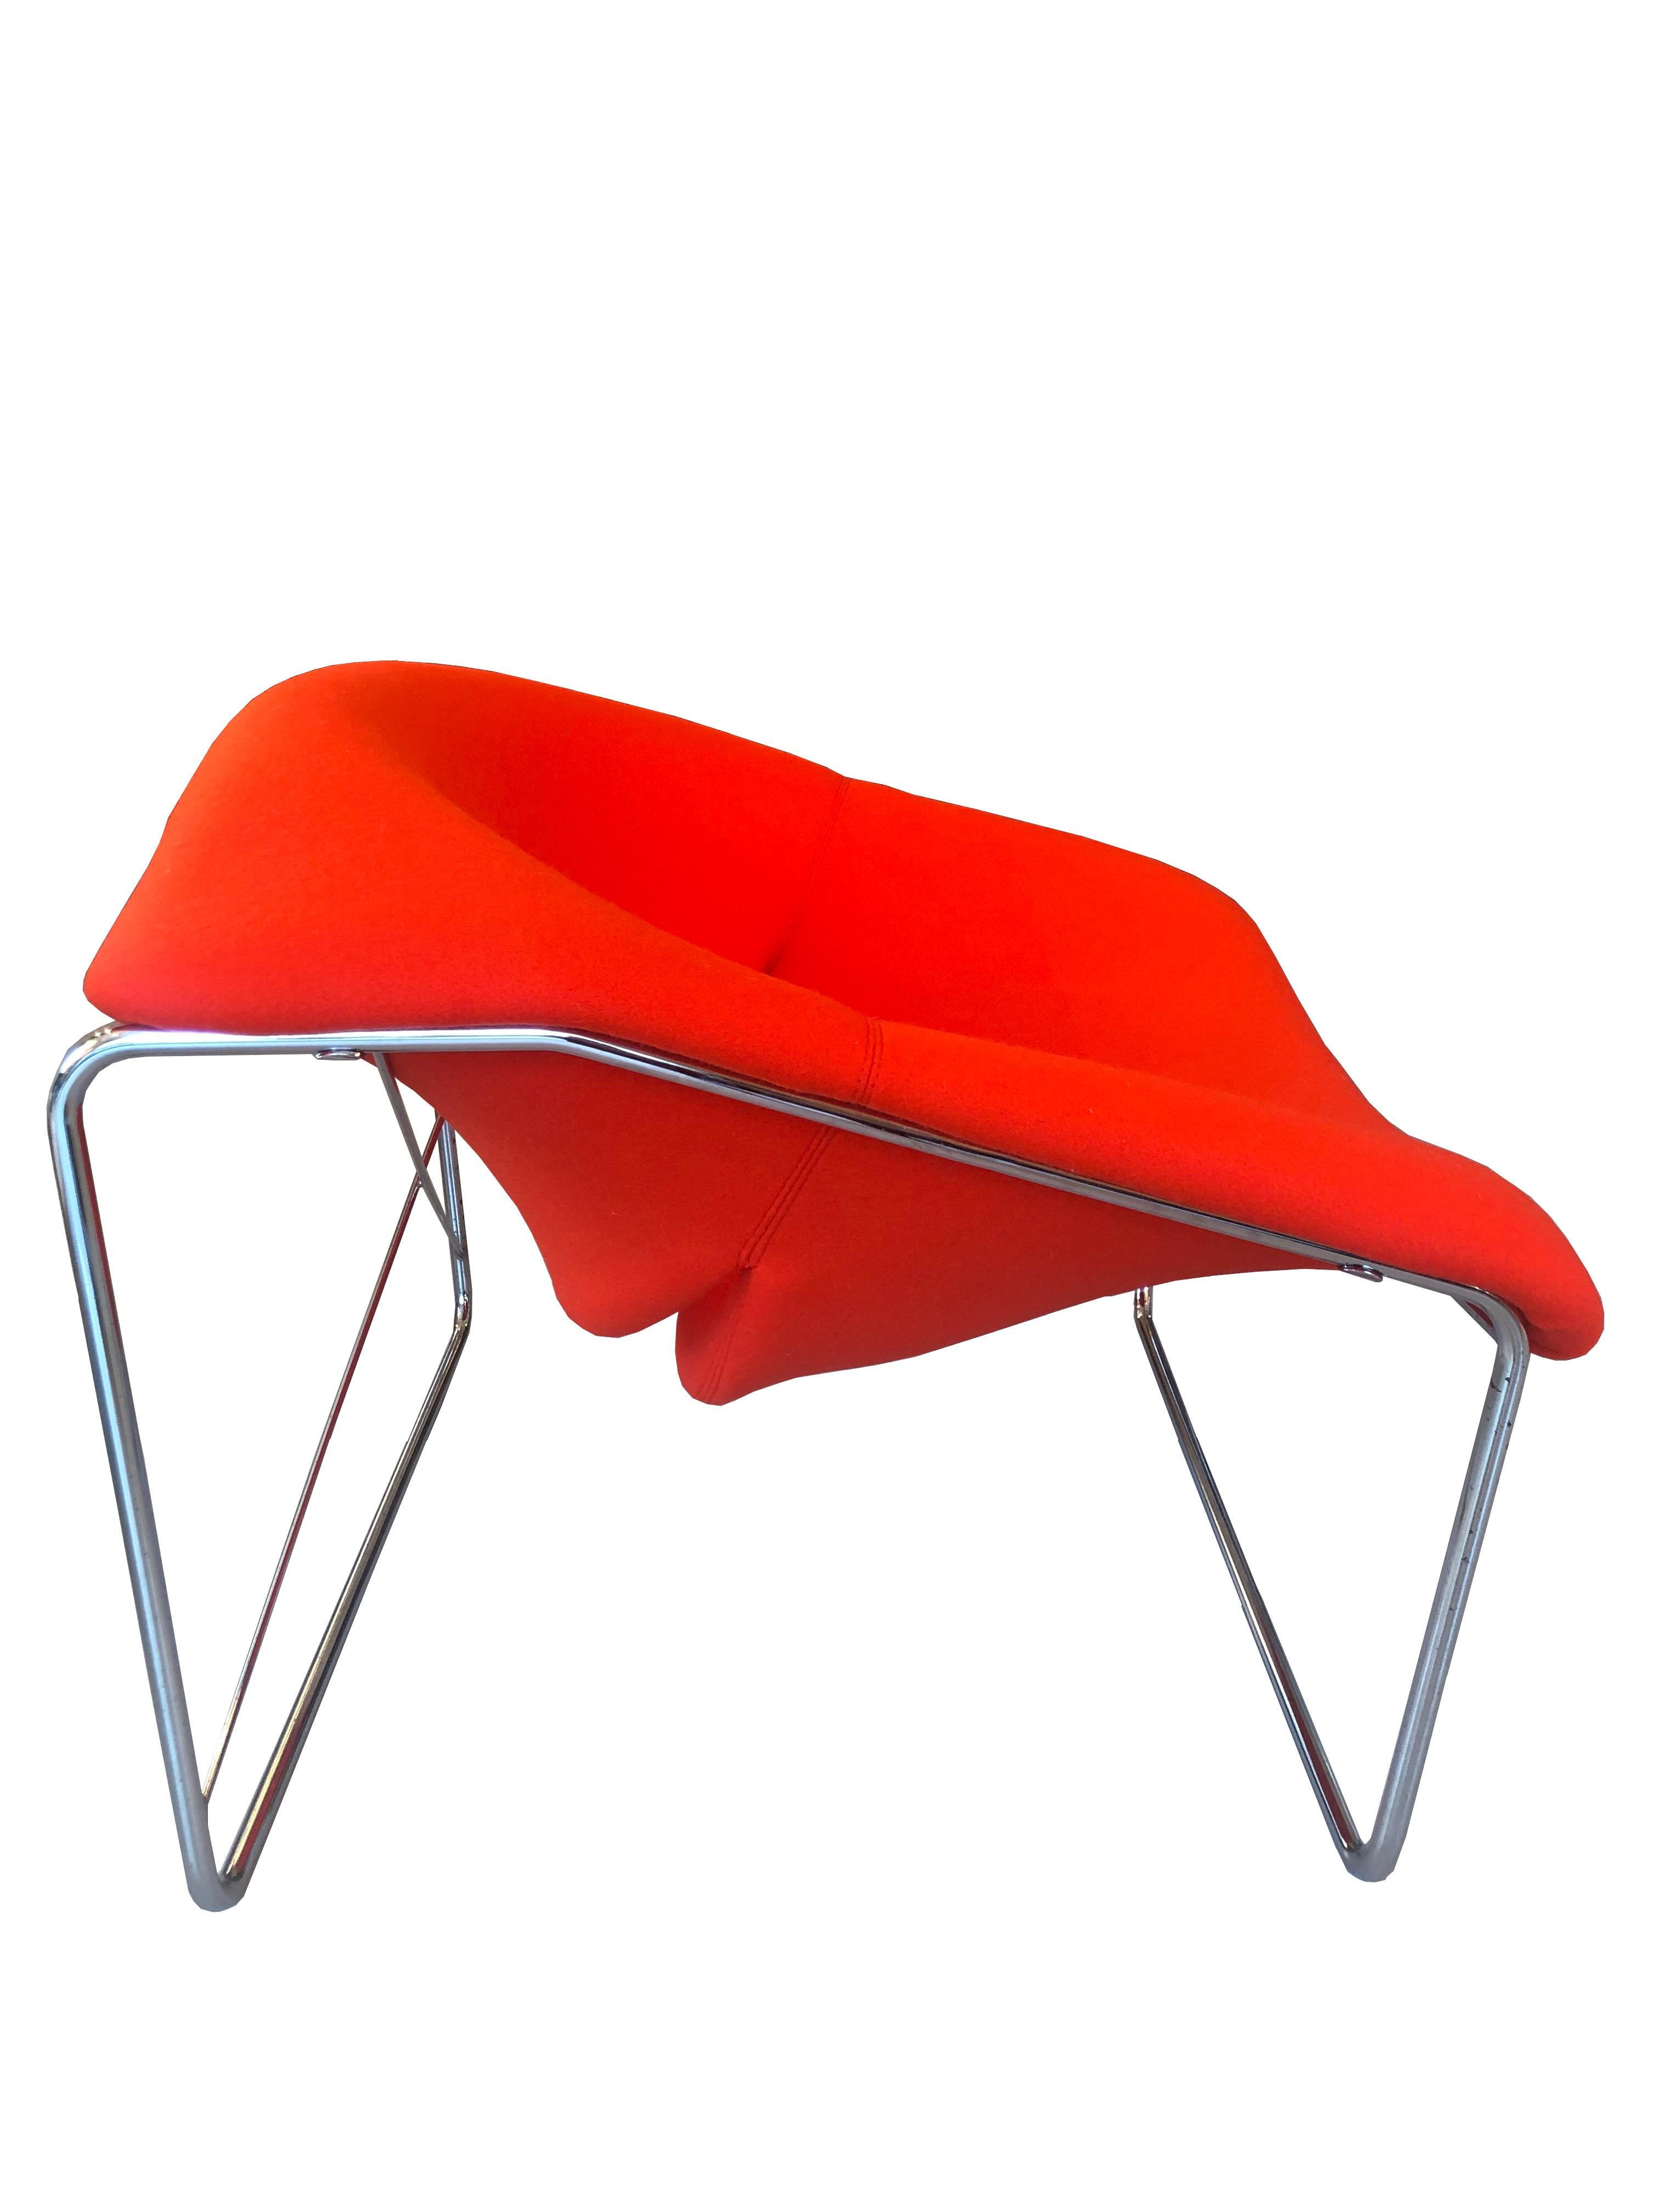 Cubic armchair by Olivier Mourgue for Airborne, 1968

in good state. New fabric from la 